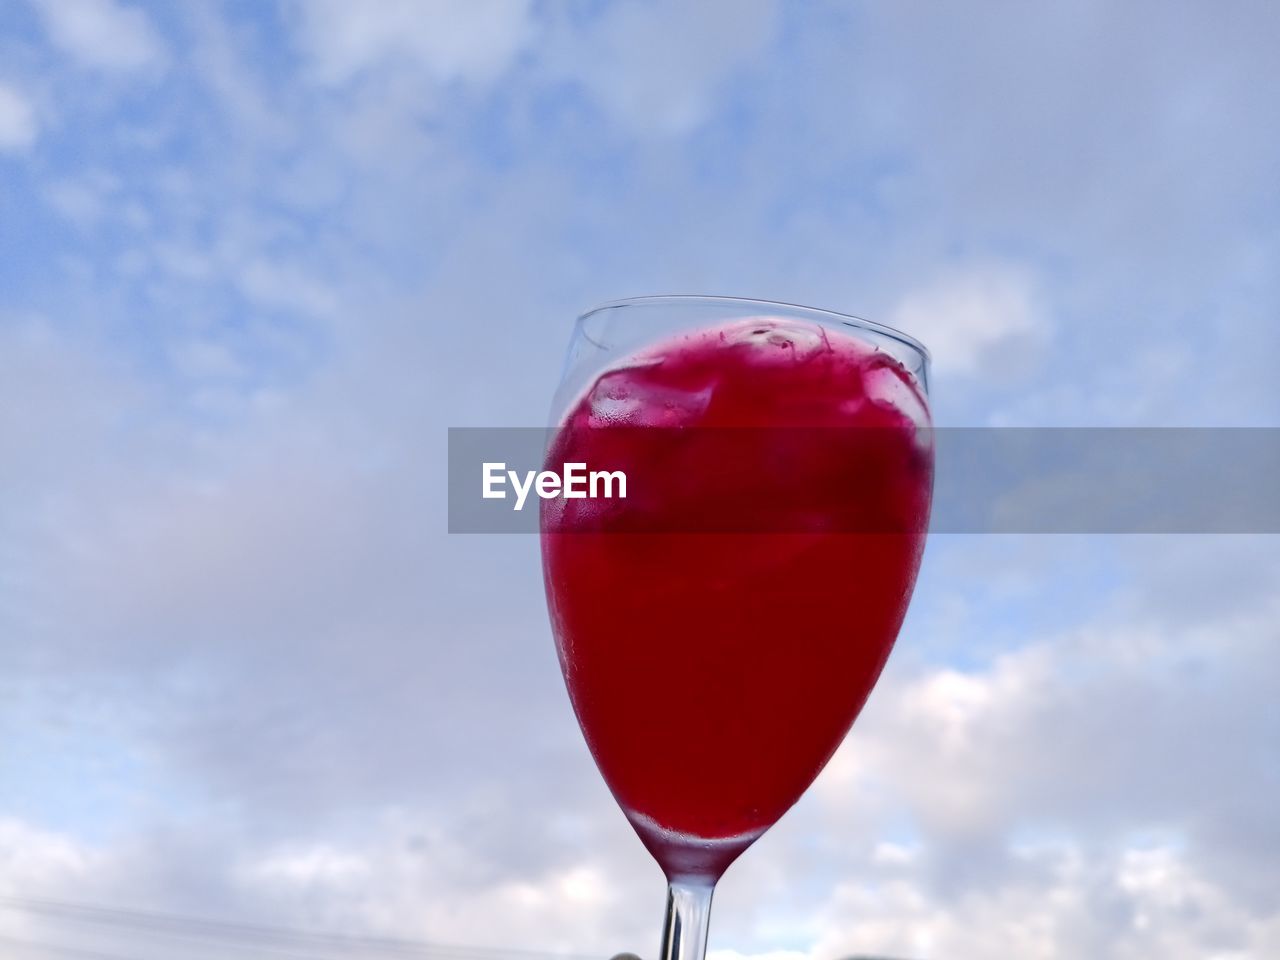 red, food and drink, sky, cloud, refreshment, glass, drink, alcohol, nature, alcoholic beverage, cocktail, freshness, drinking glass, wine, food, low angle view, no people, cosmopolitan, wine glass, pink lady, day, outdoors, close-up, fruit, household equipment, celebration, single object, blue